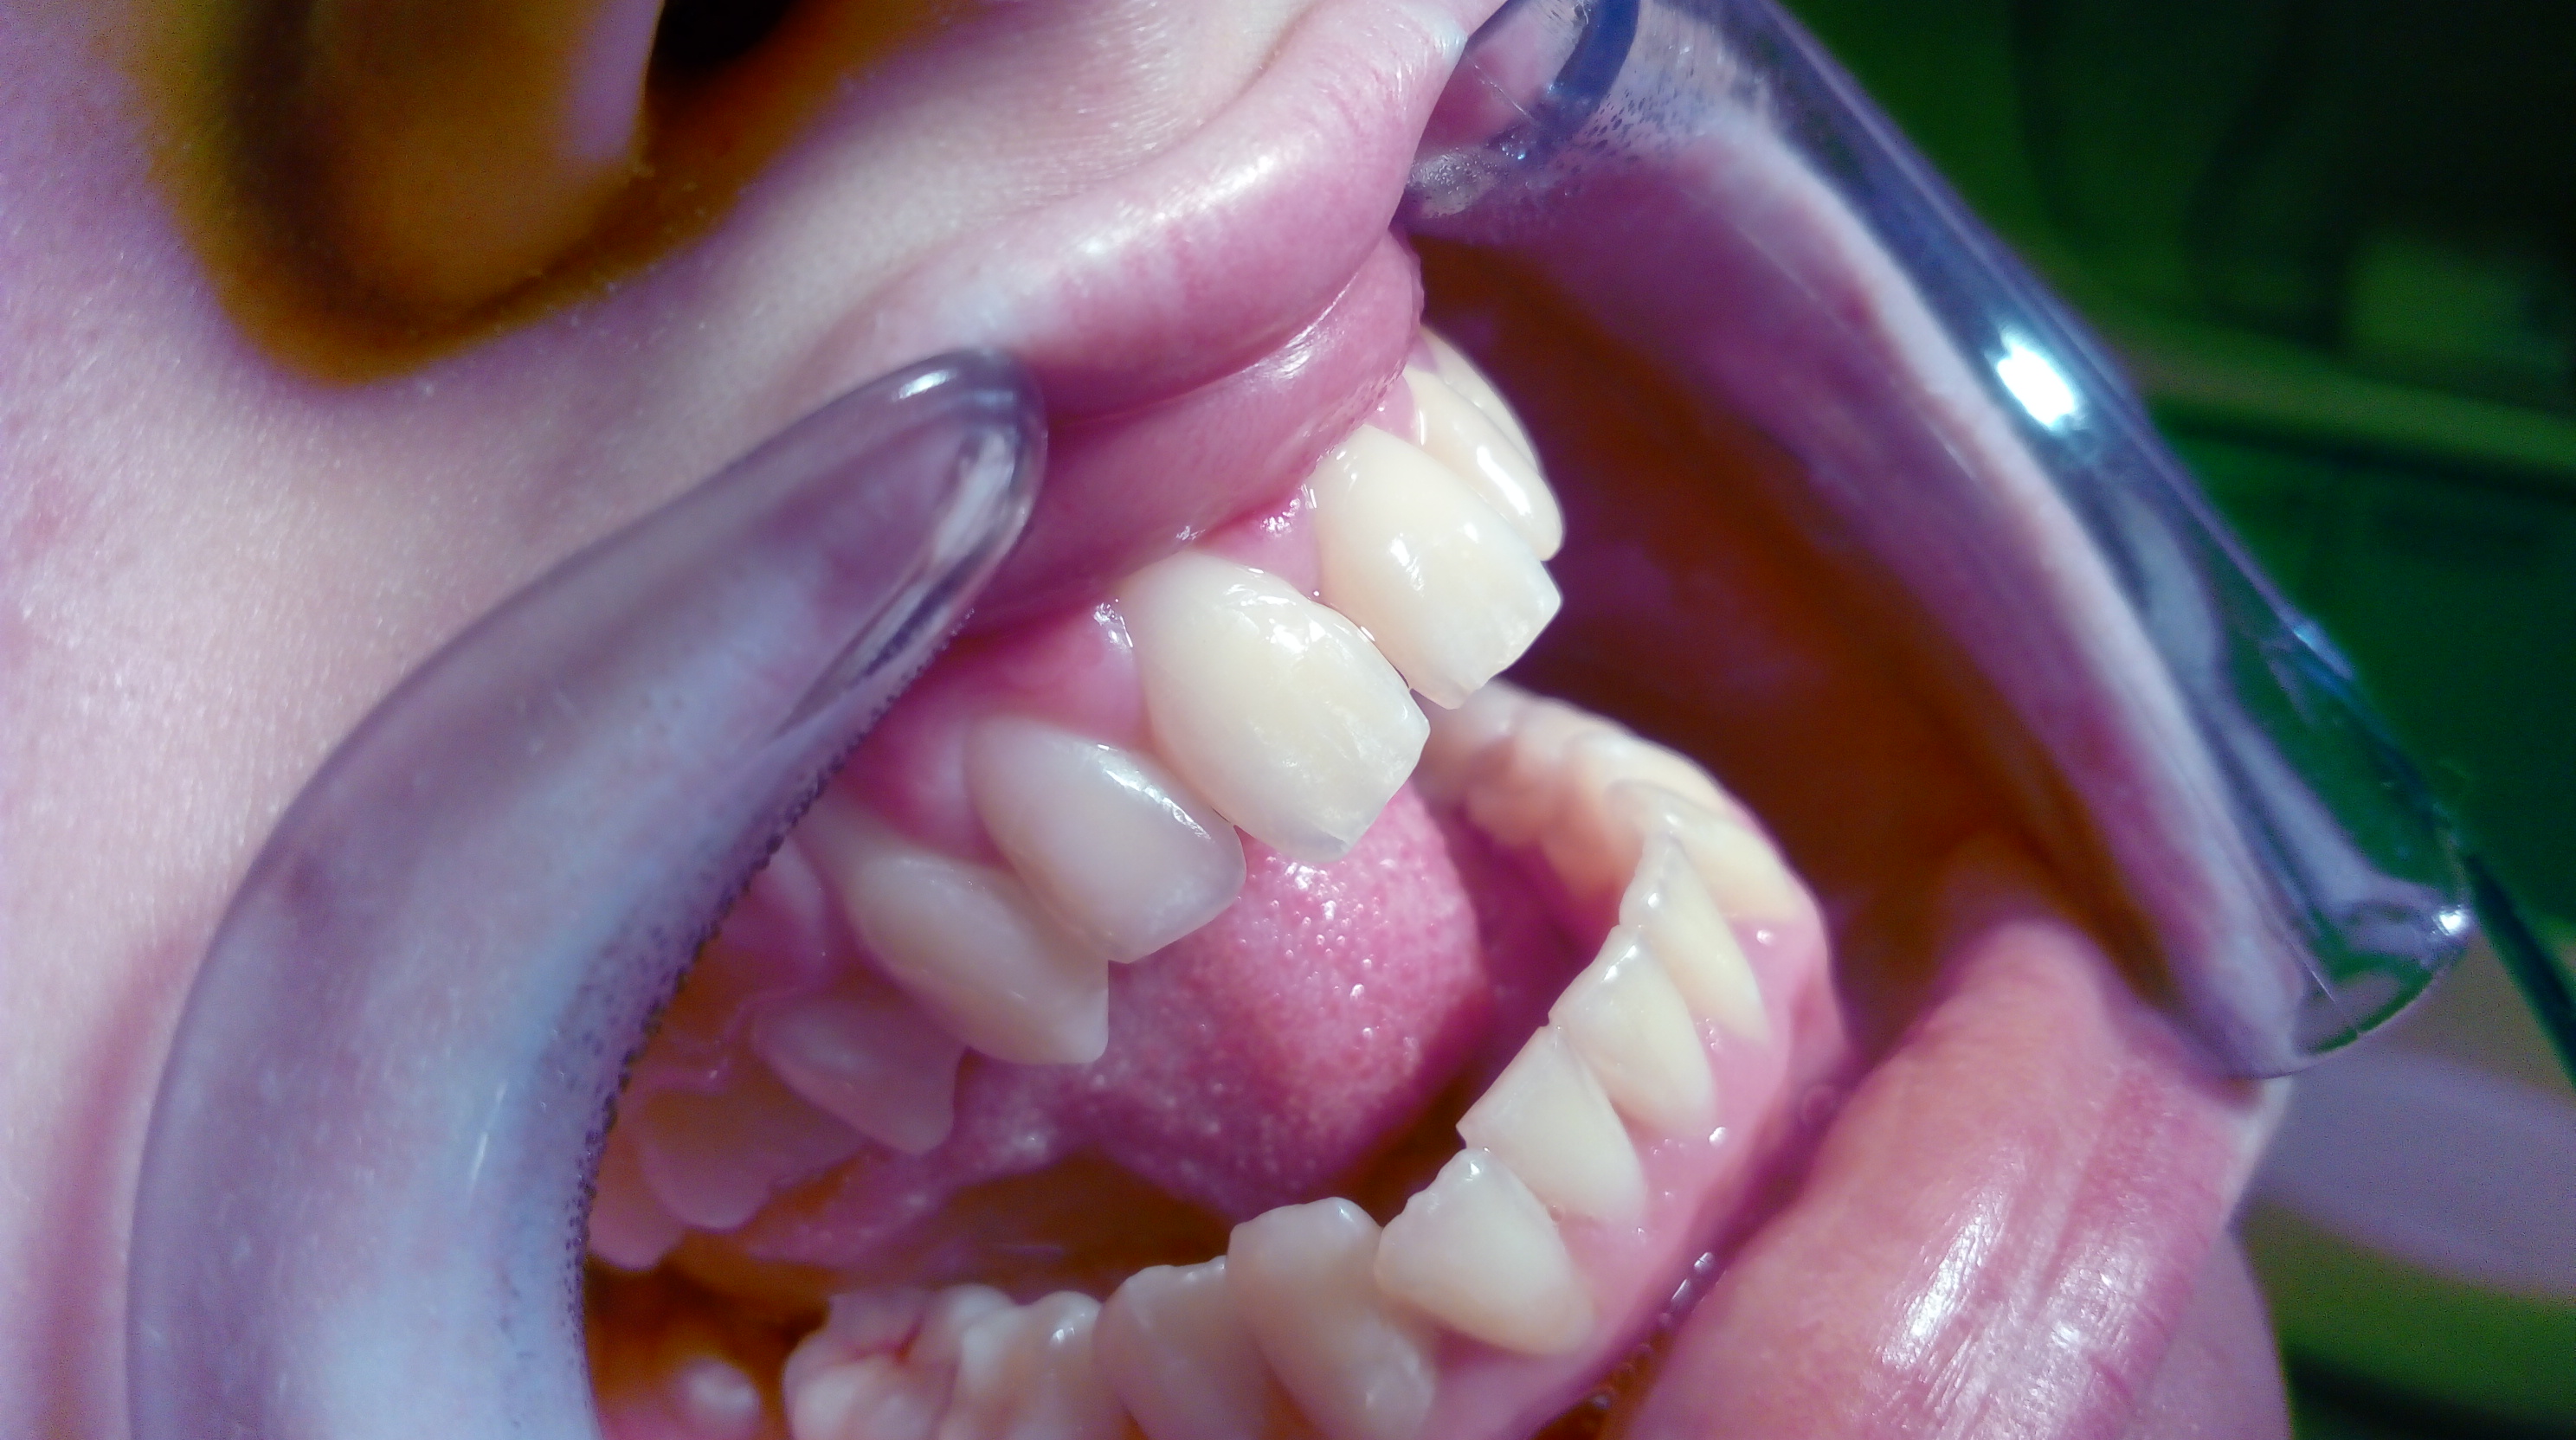 The condition after dental hygiene and frontal teeth treatment by composite fillings